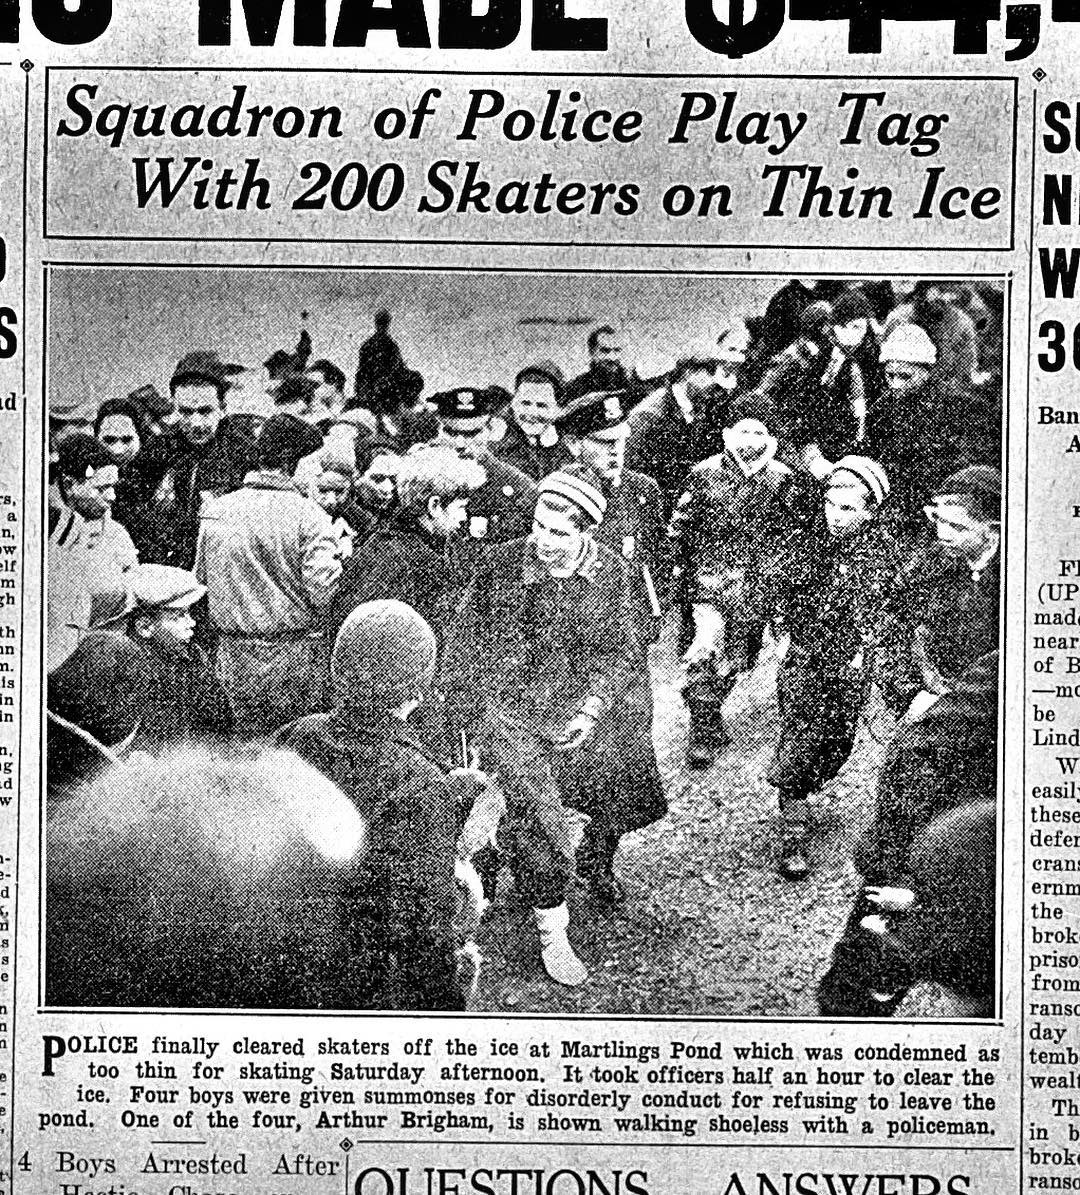 Police Cleared Skaters Off Martlings Pond Due To Thin Ice, Taking 30 Minutes And Resulting In Summonses For Four Boys Who Refused To Leave, 1935.